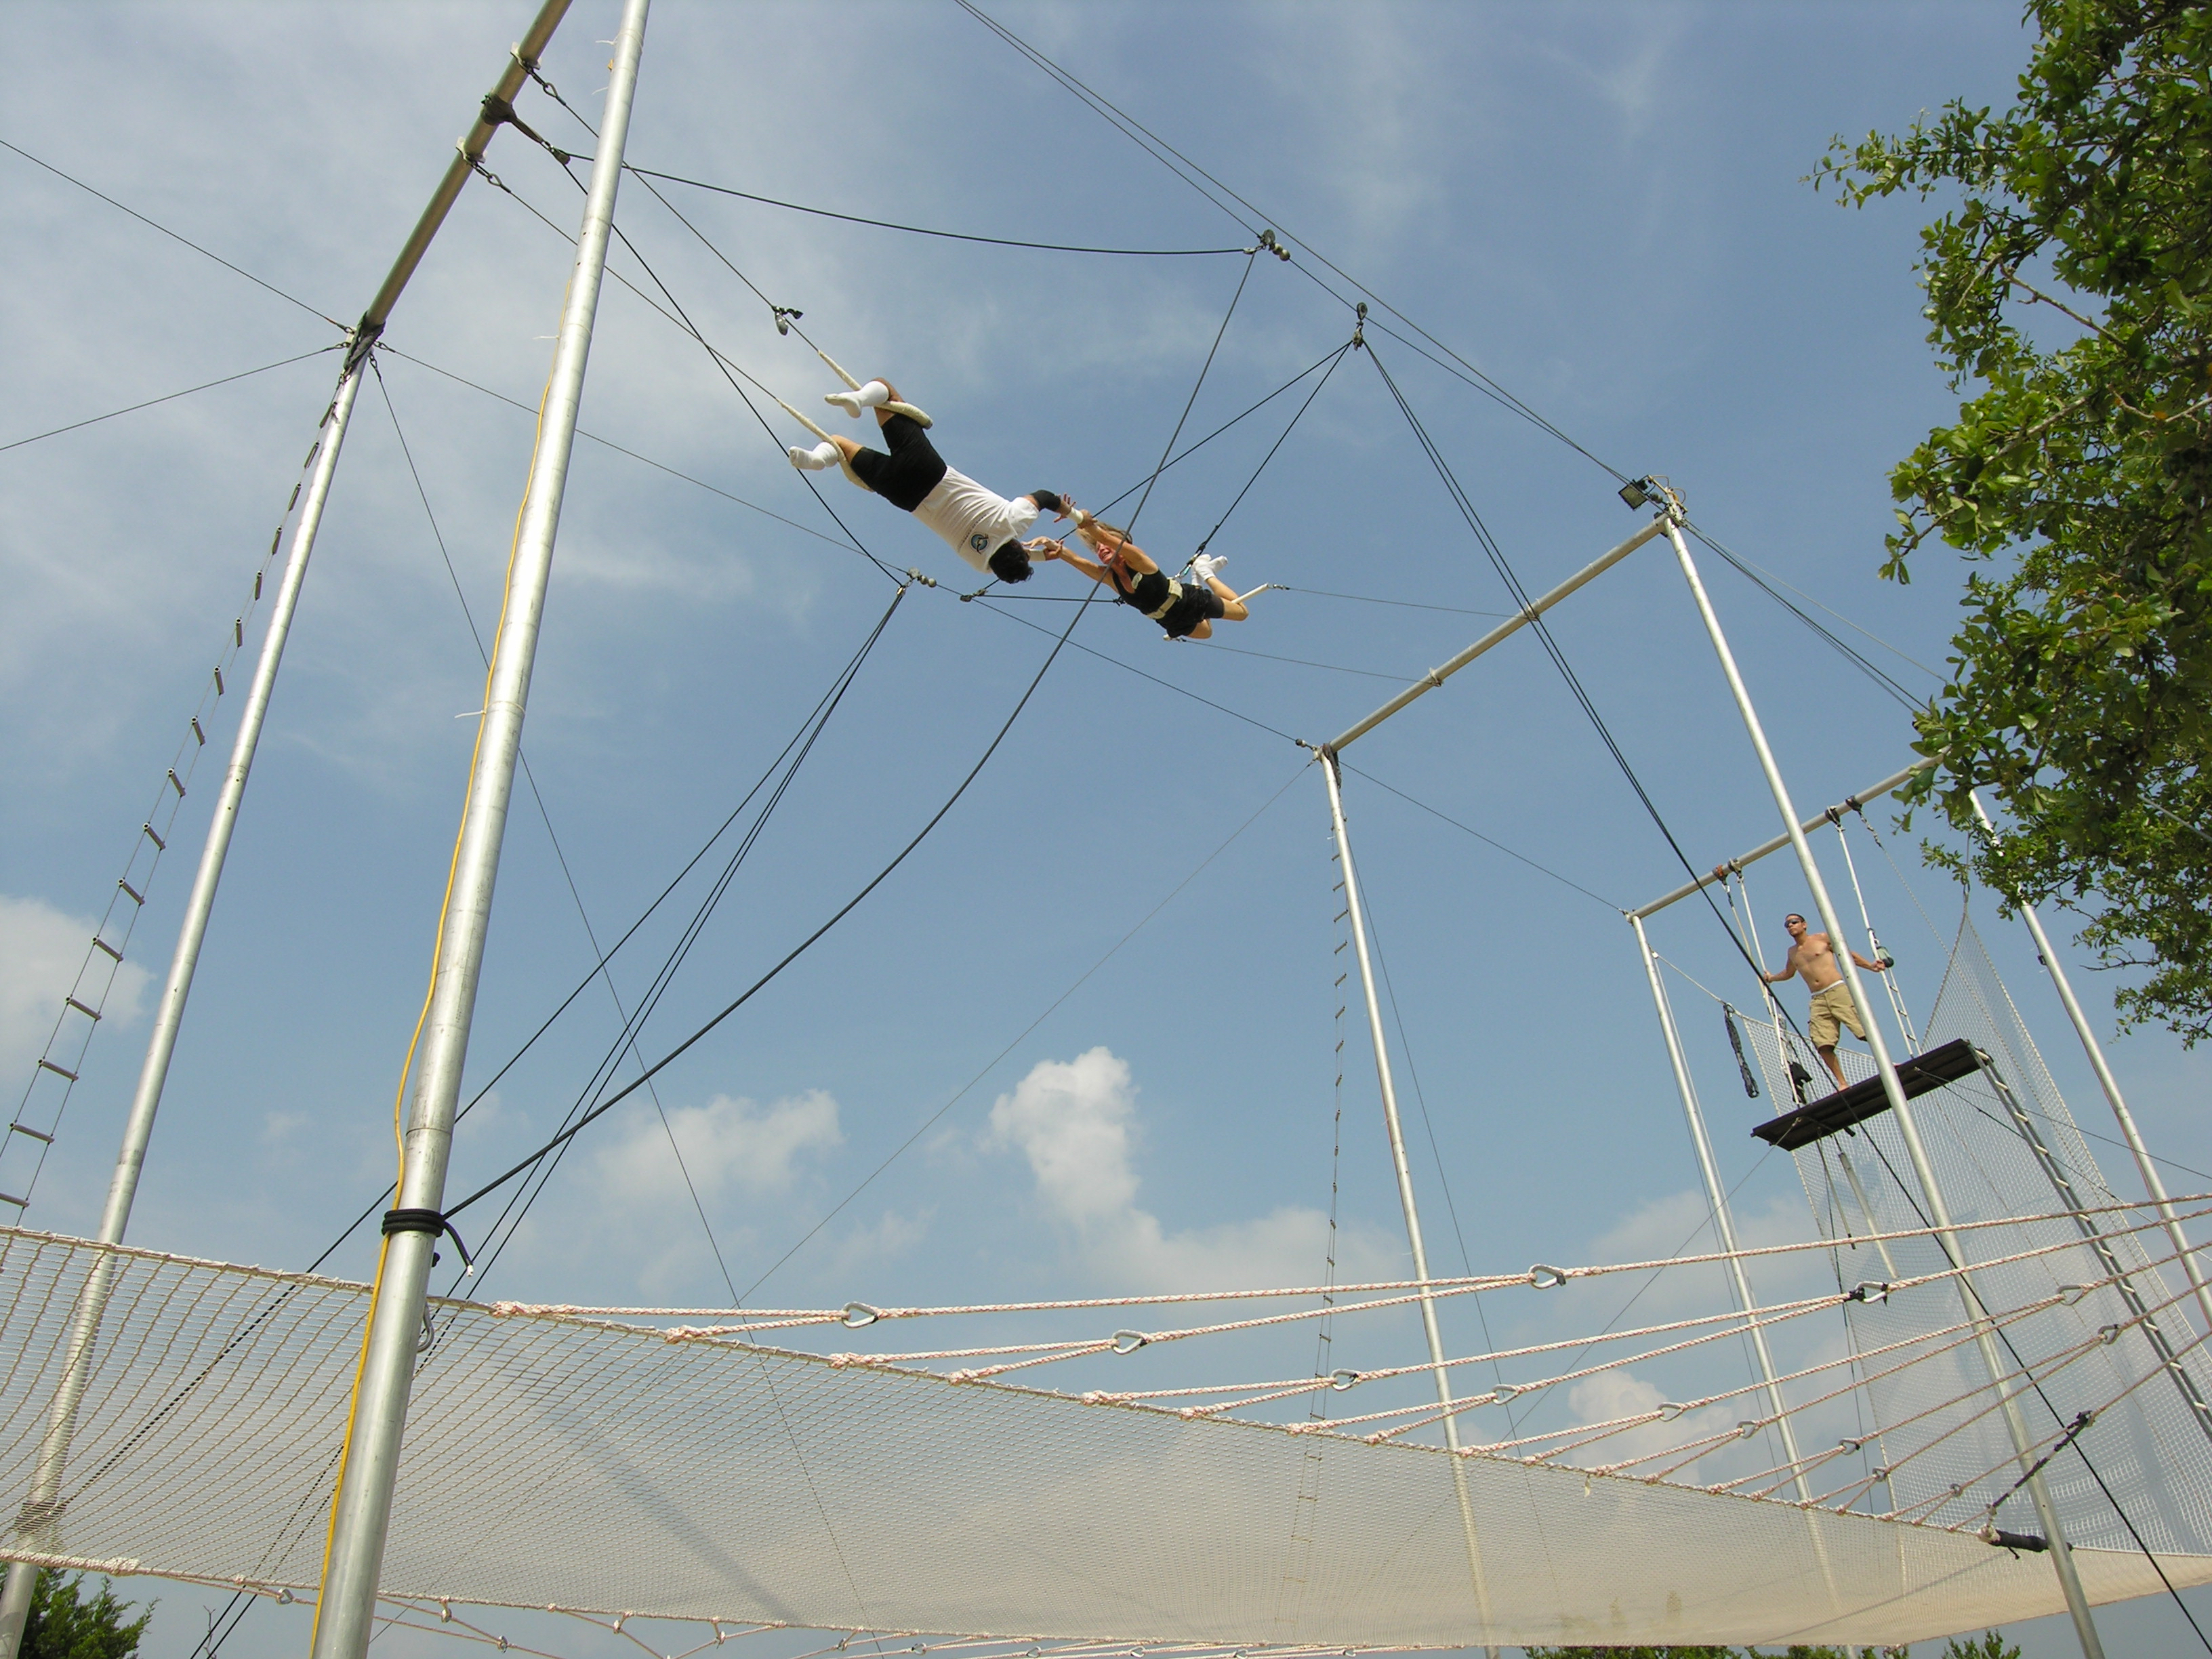 nancy Addison, nutritionist, took trapeze lessons and she is in the photo getting caught by the trapeze artist.